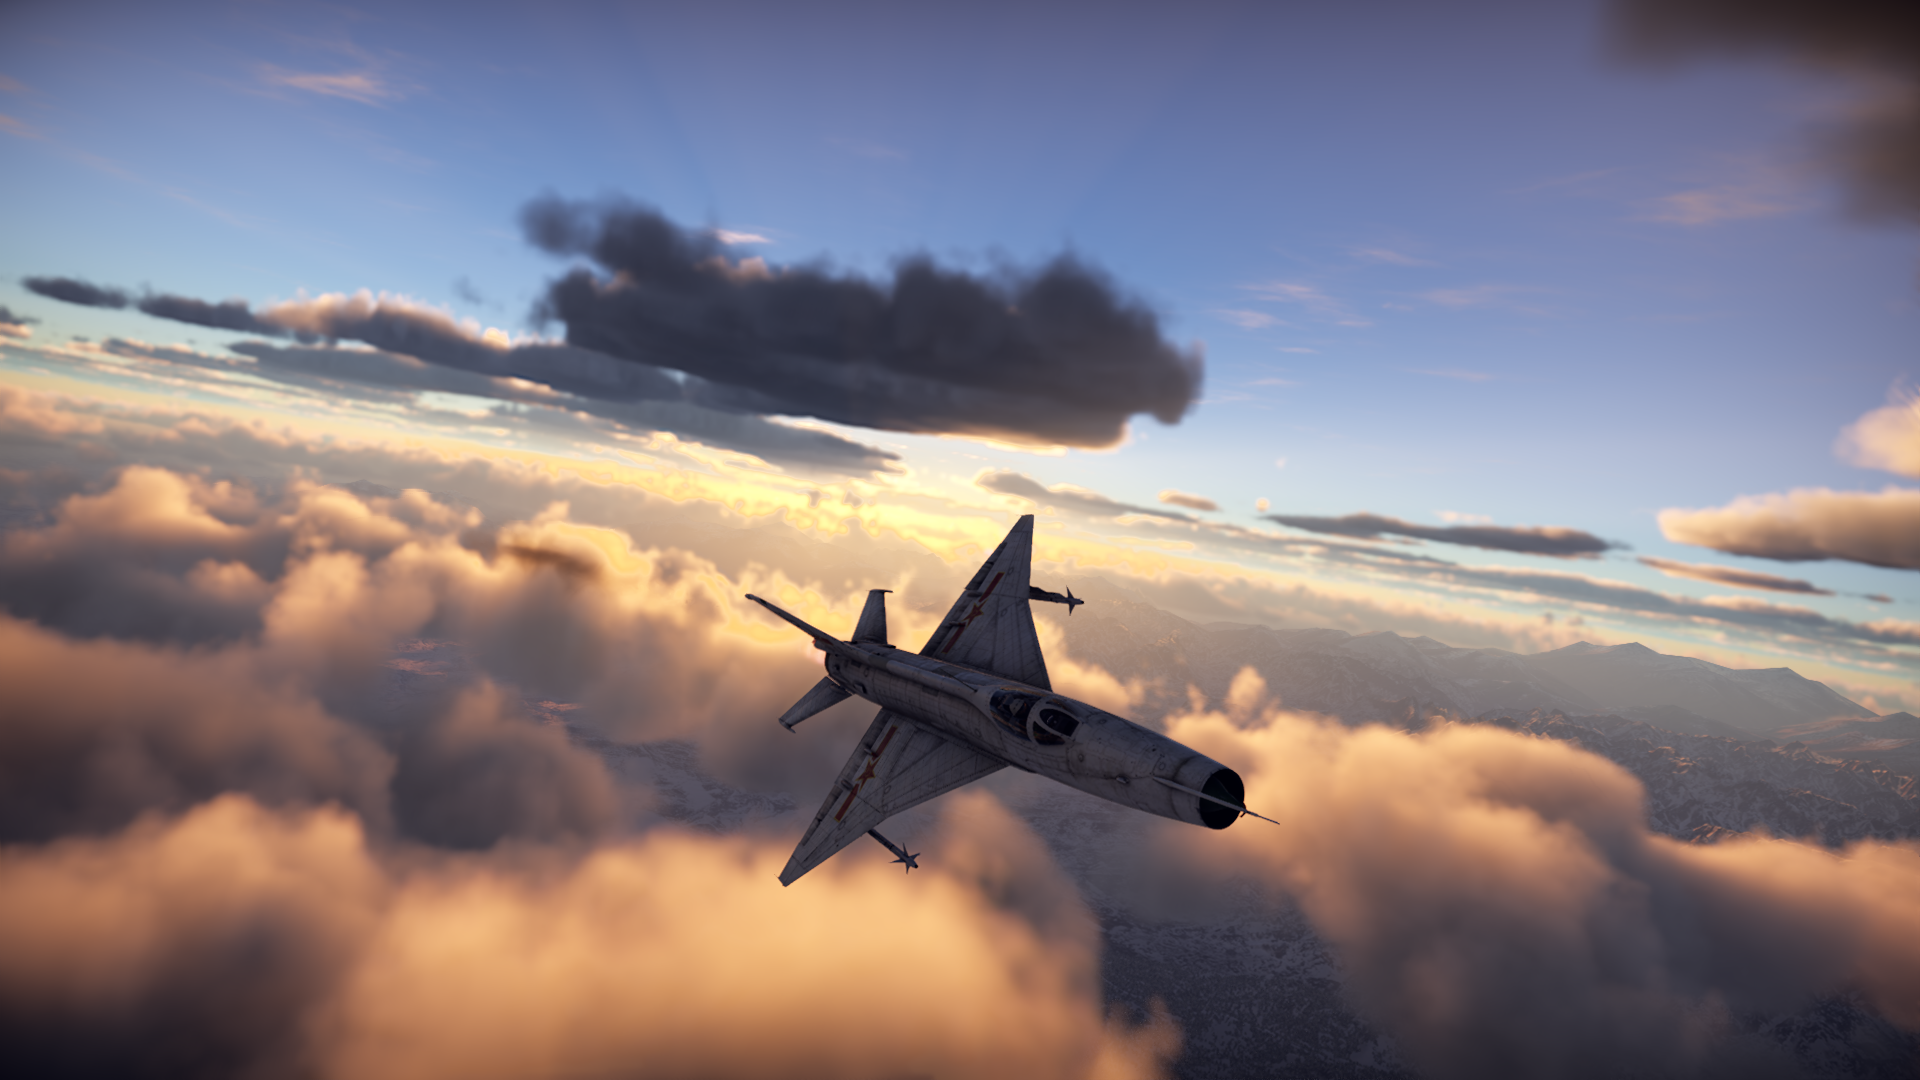 General 1920x1080 J-7E screen shot War Thunder sunset jet fighter military PC gaming sky clouds military aircraft military vehicle vehicle